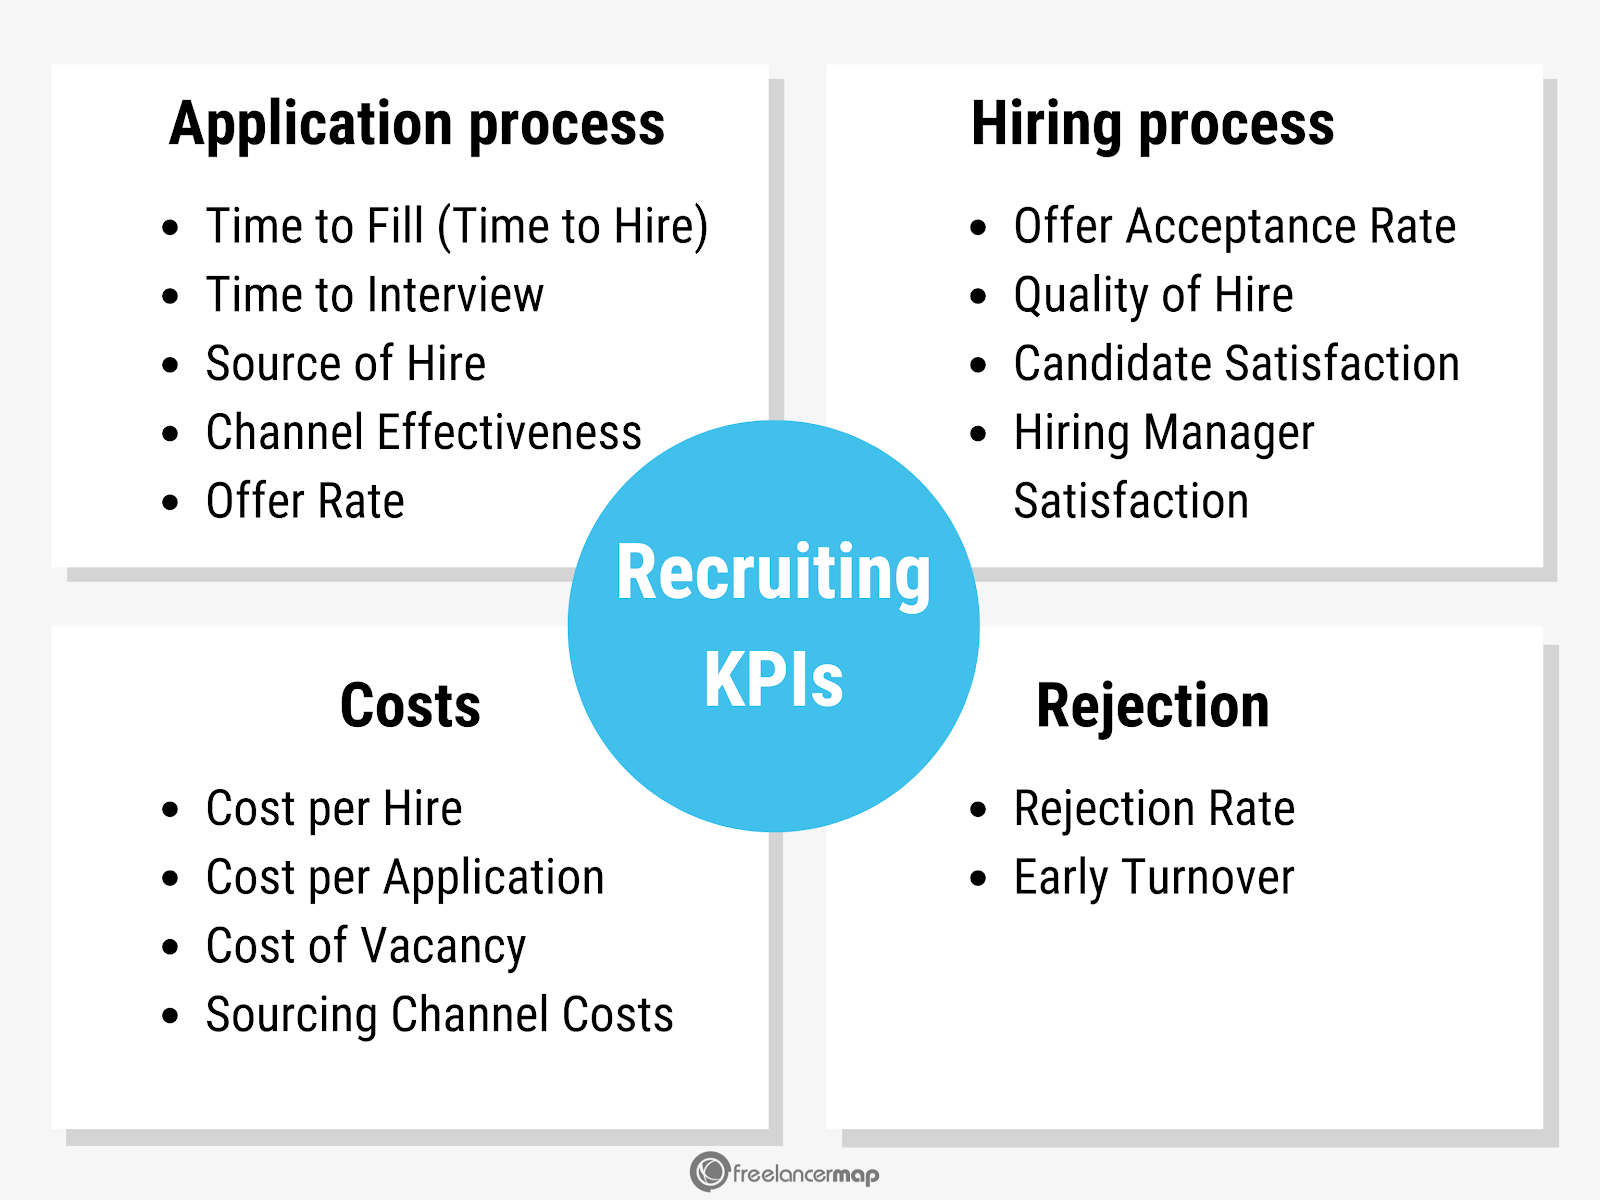  Recruiting KPIs at a glance 